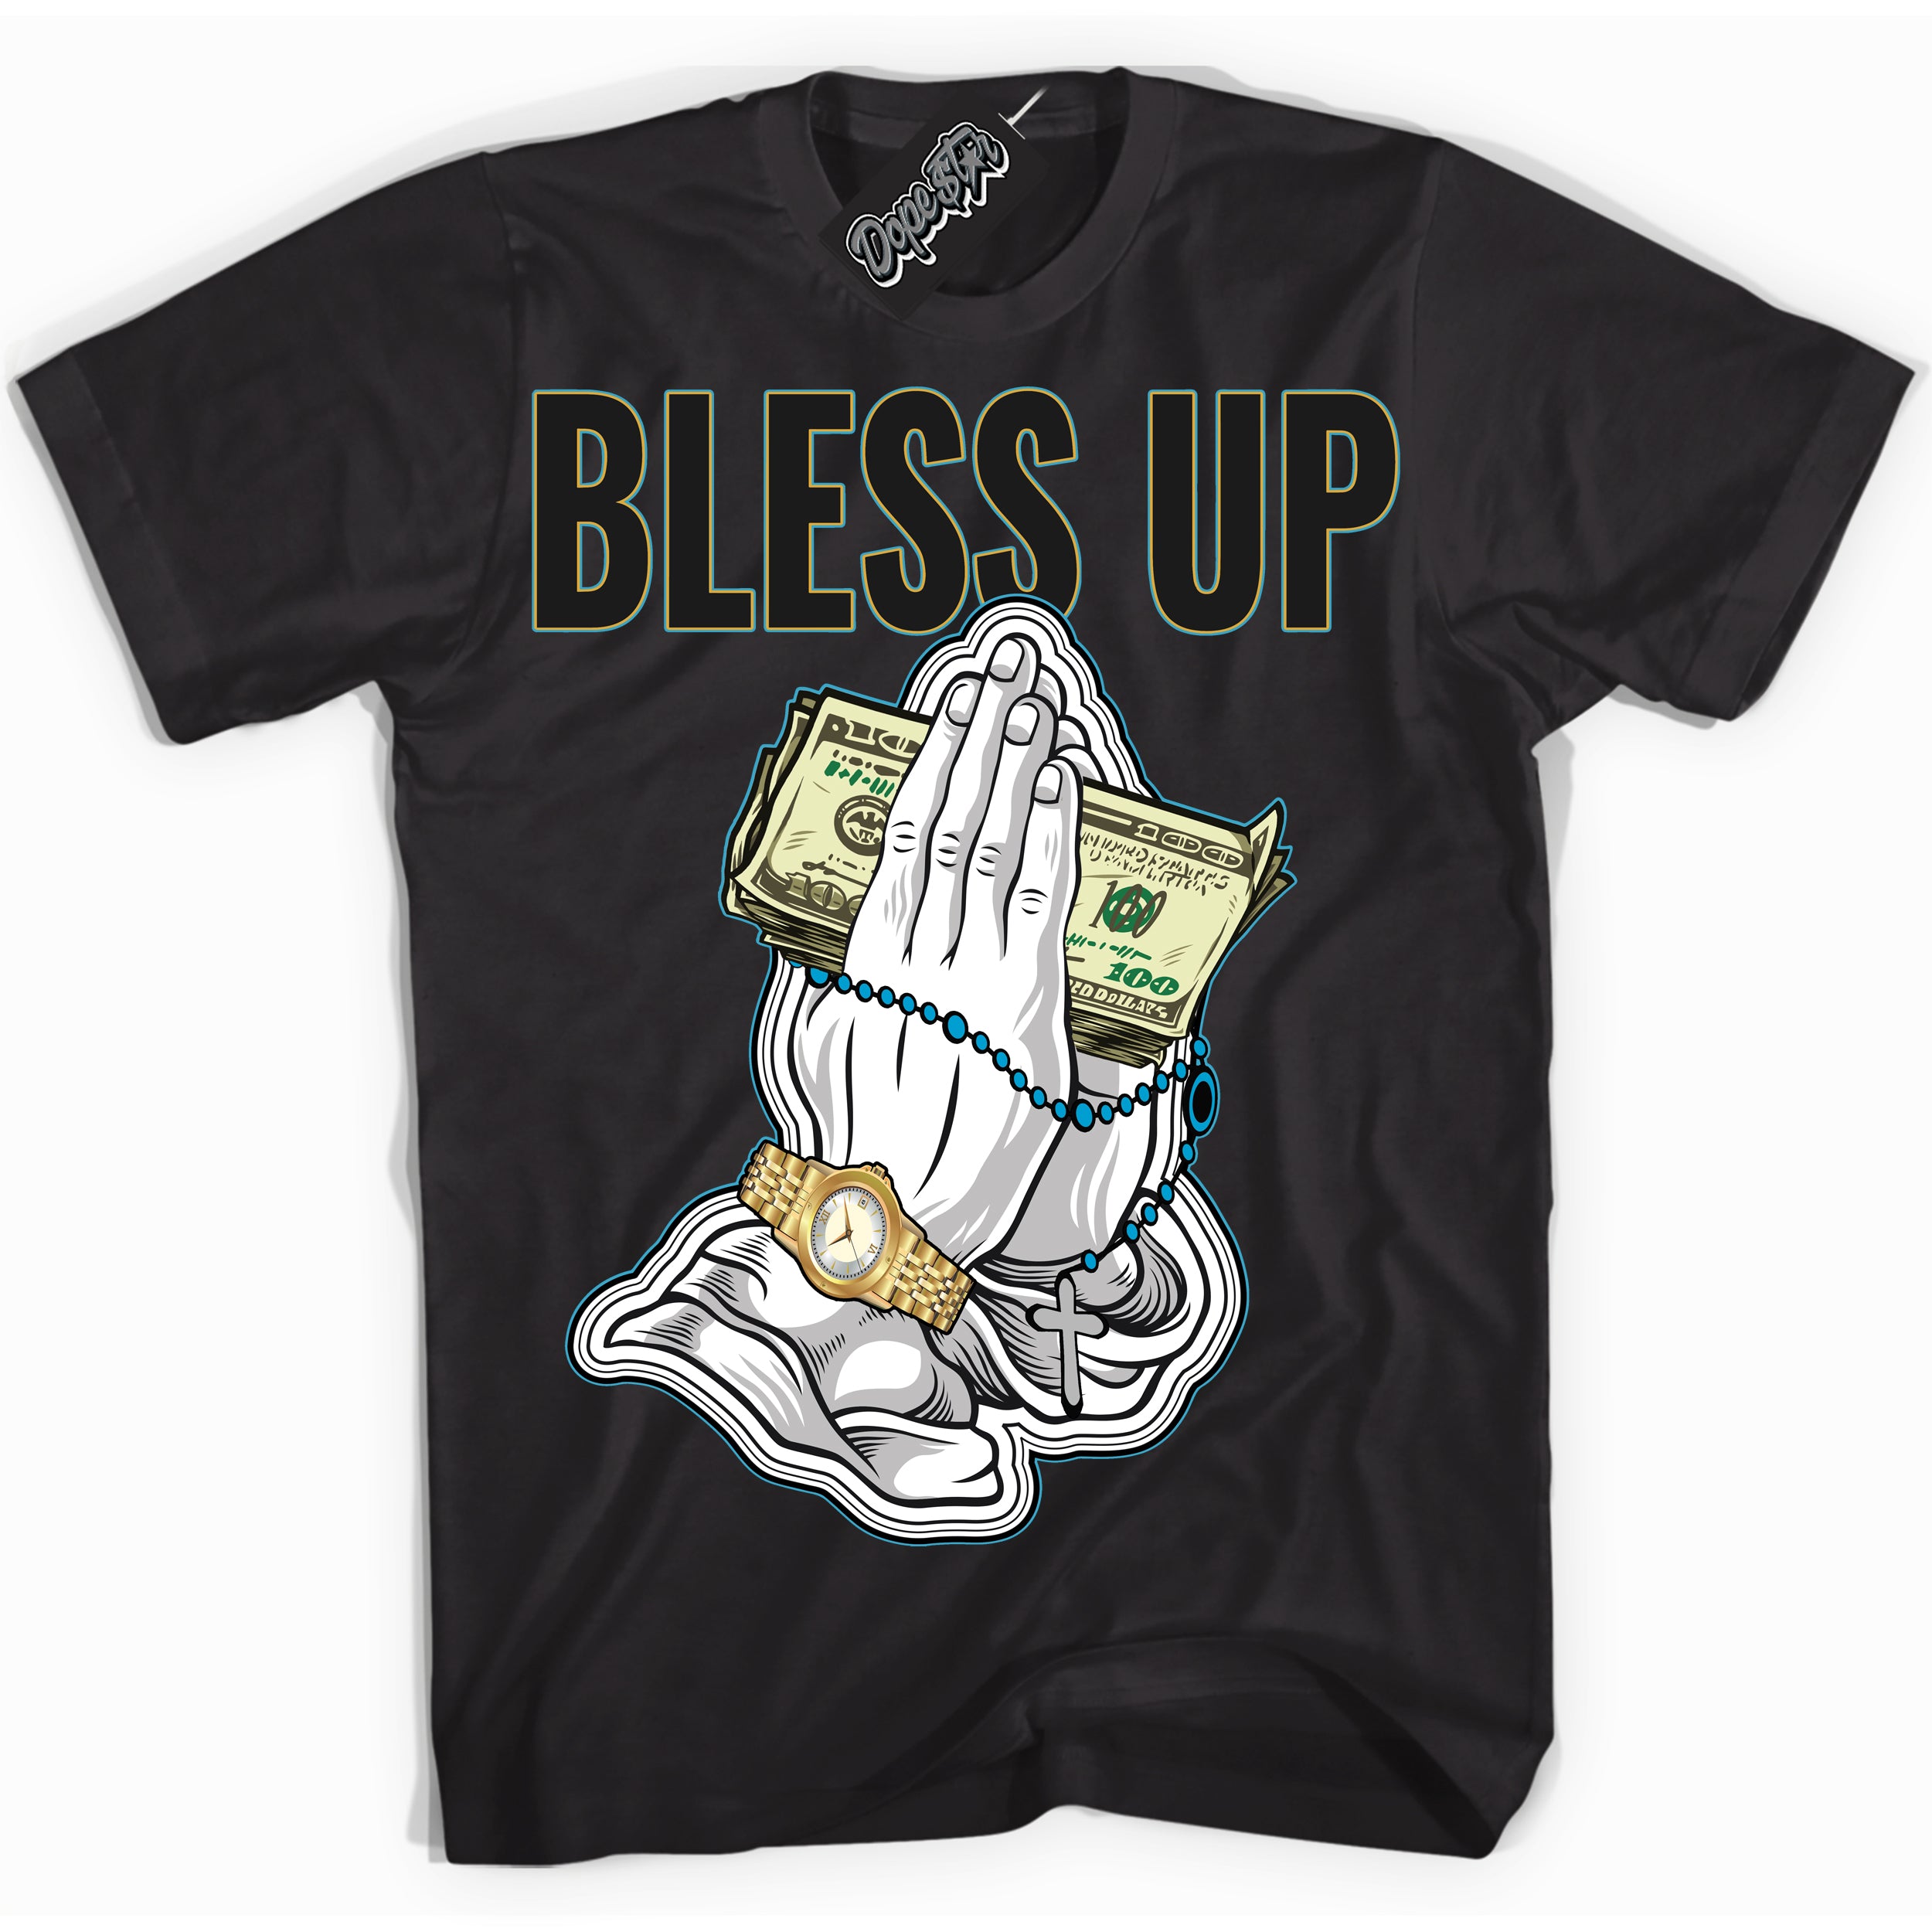 Cool Black Shirt with “ Bless Up” design that perfectly matches Aqua 5s Sneakers.